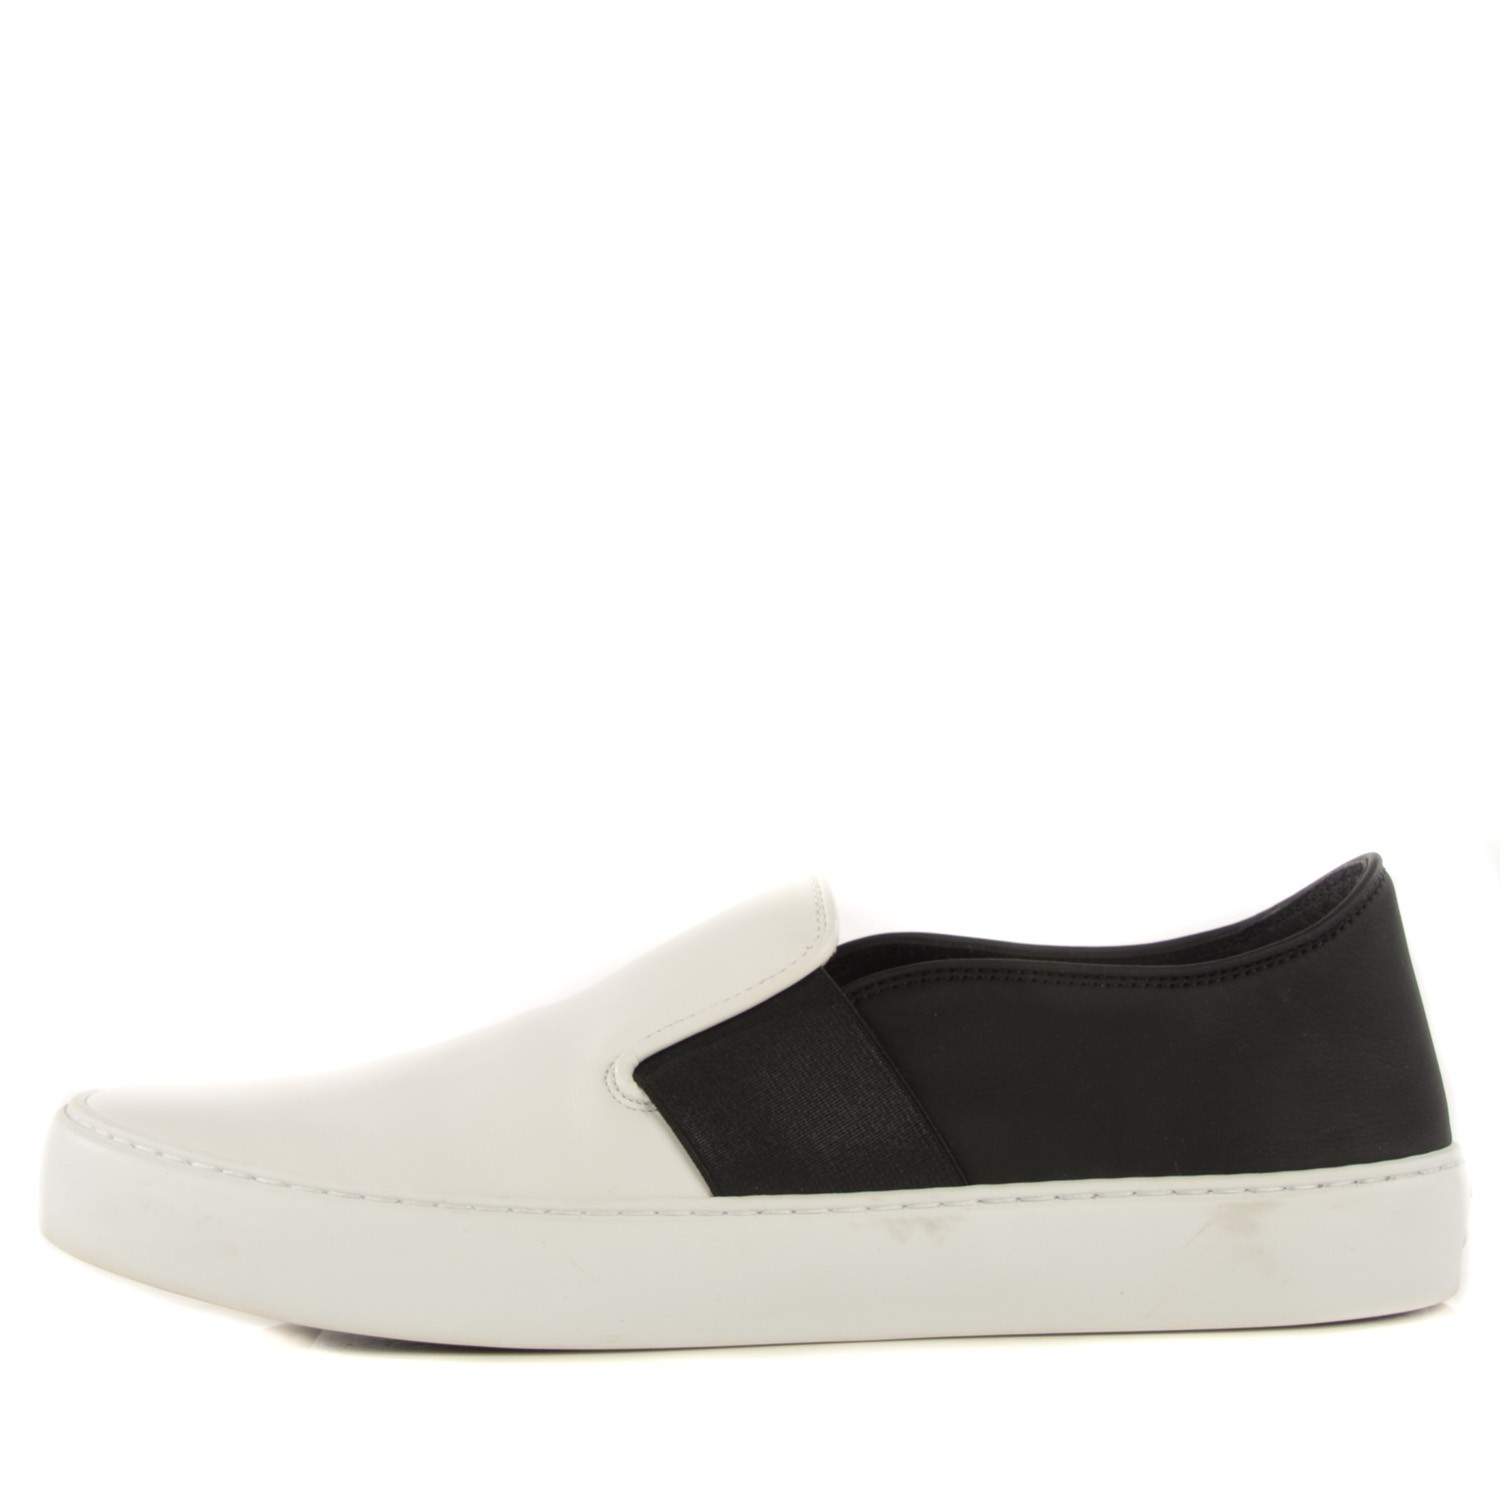 CHANEL Leather Slip On Sneakers 37.5 White Black 115418